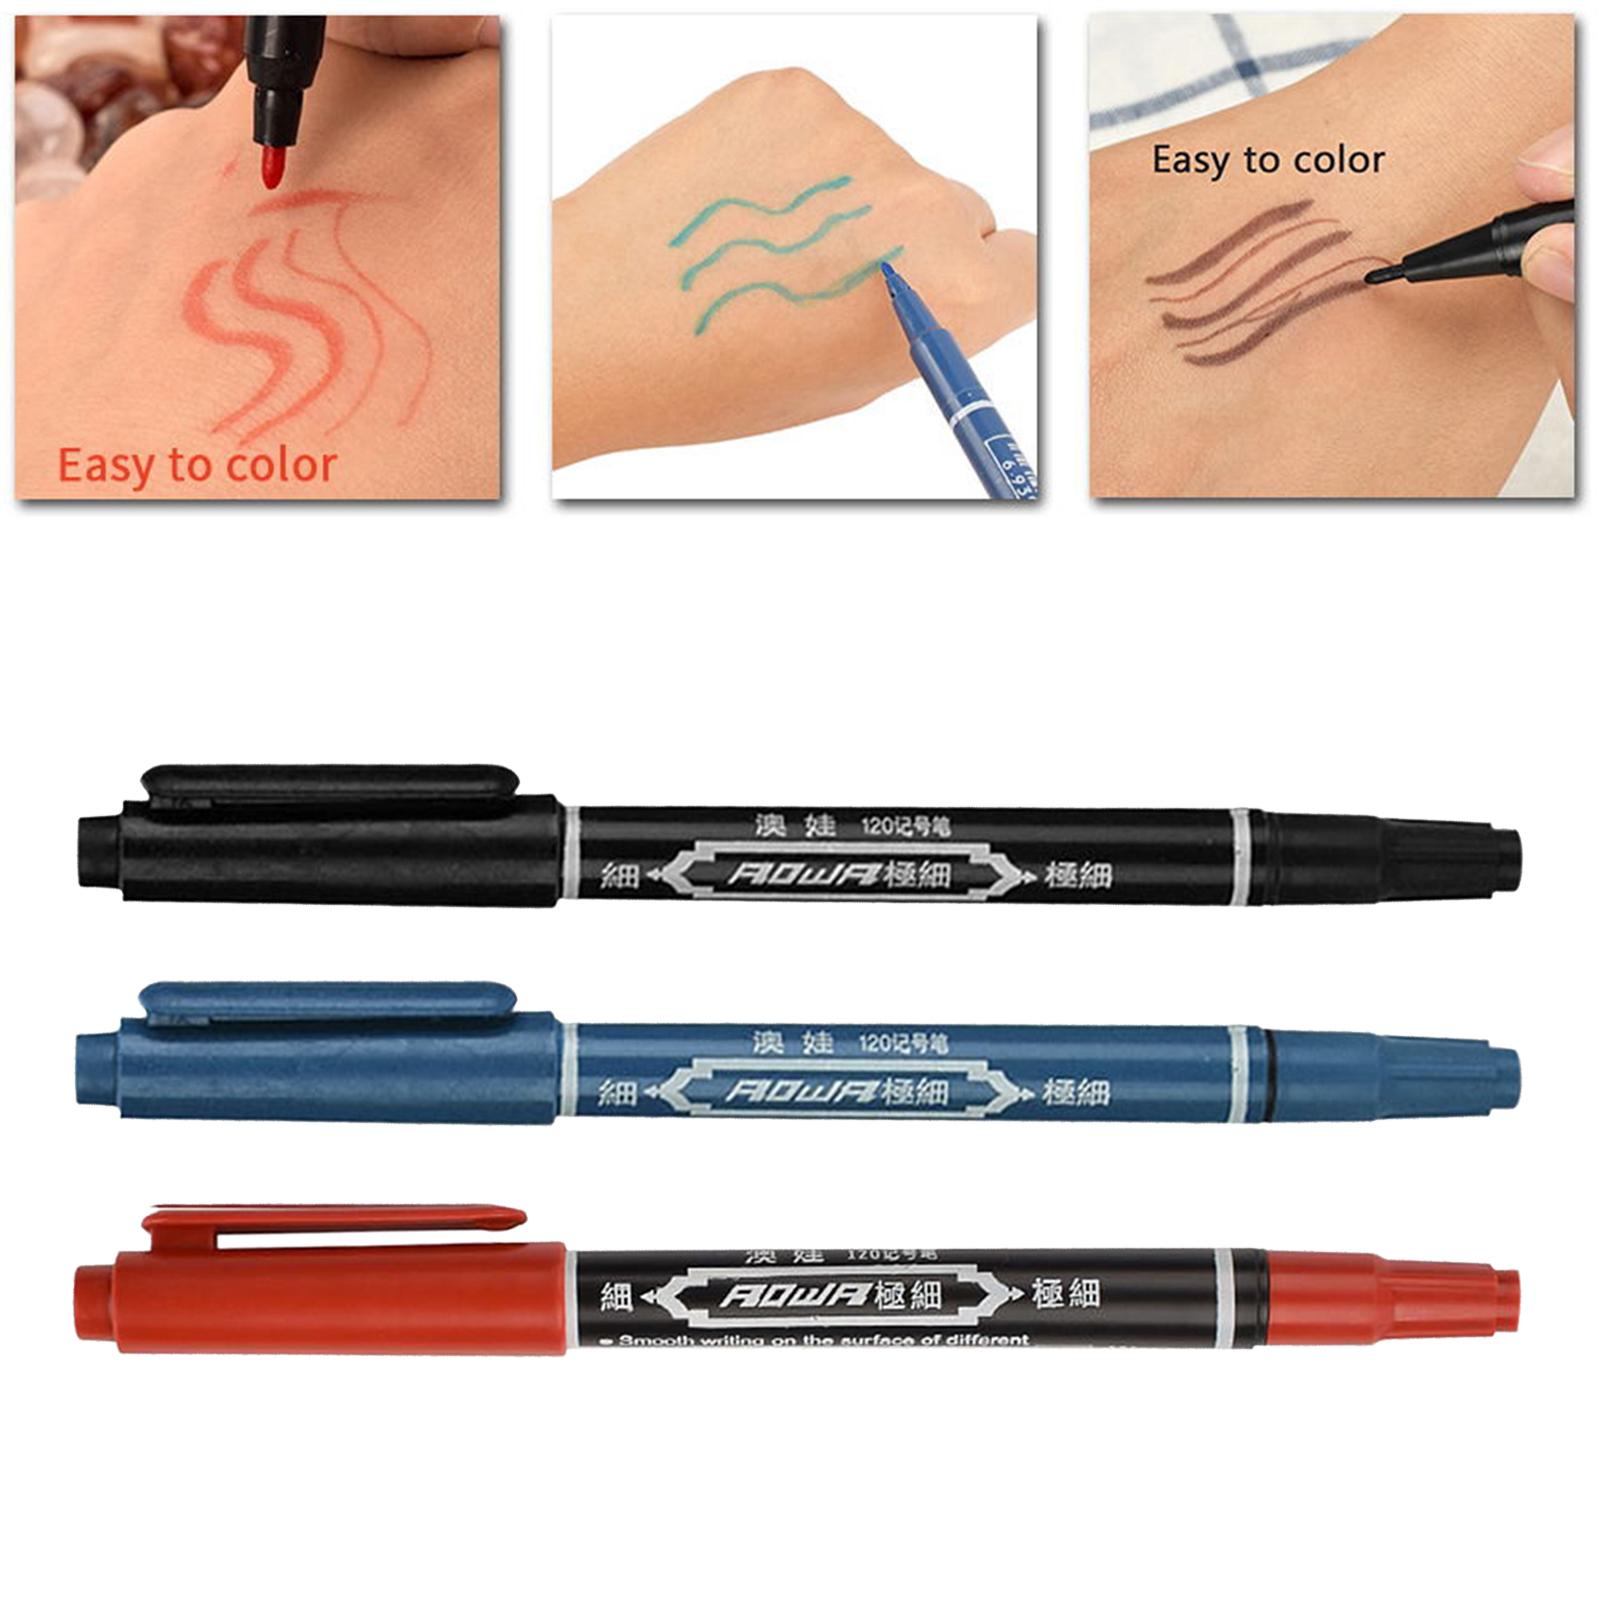 3 Pcs Double Ended Marker Pen Professional Marker Anti-clog Tattoo Pencil